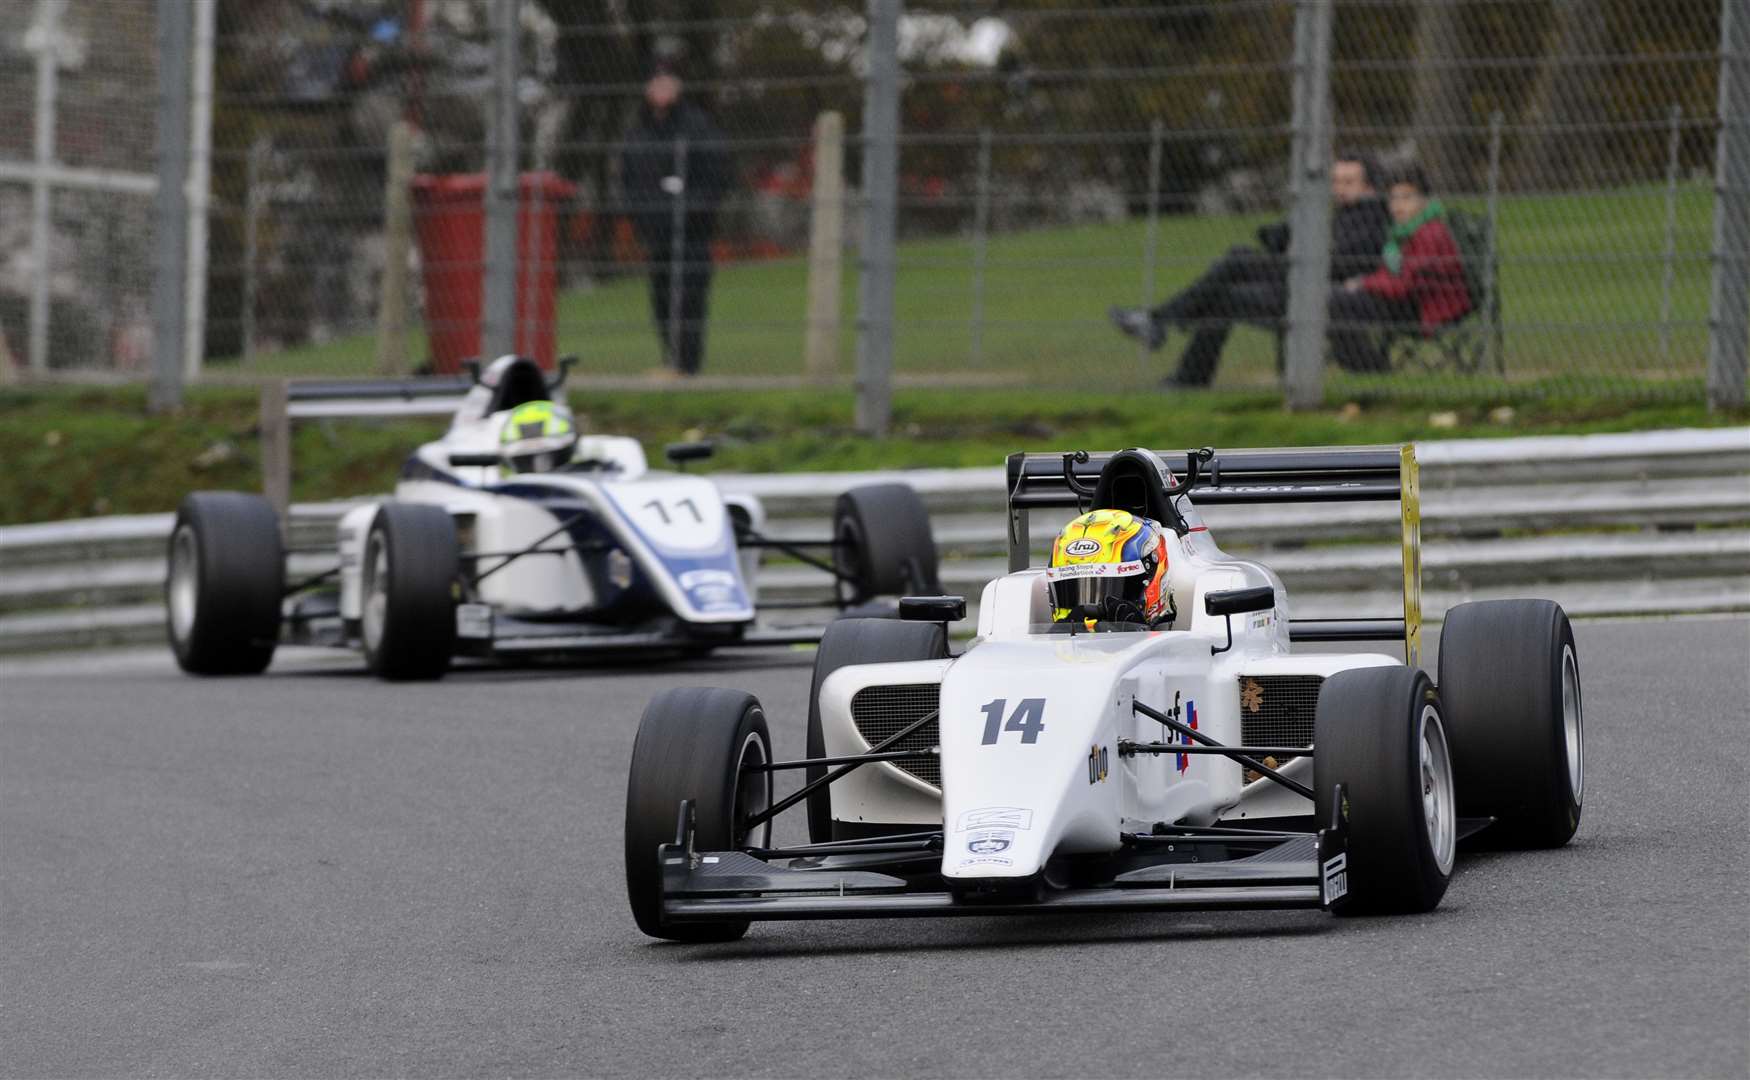 Aged just 16, Lando Norris competed in the BRDC Formula 4 Autumn Trophy at Brands Hatch in November 2015, driving for HHC Motorsport. Here, he chases 18-year-old Barnicoat through Druids in an event that attracted five starters. Picture: Simon Hildrew